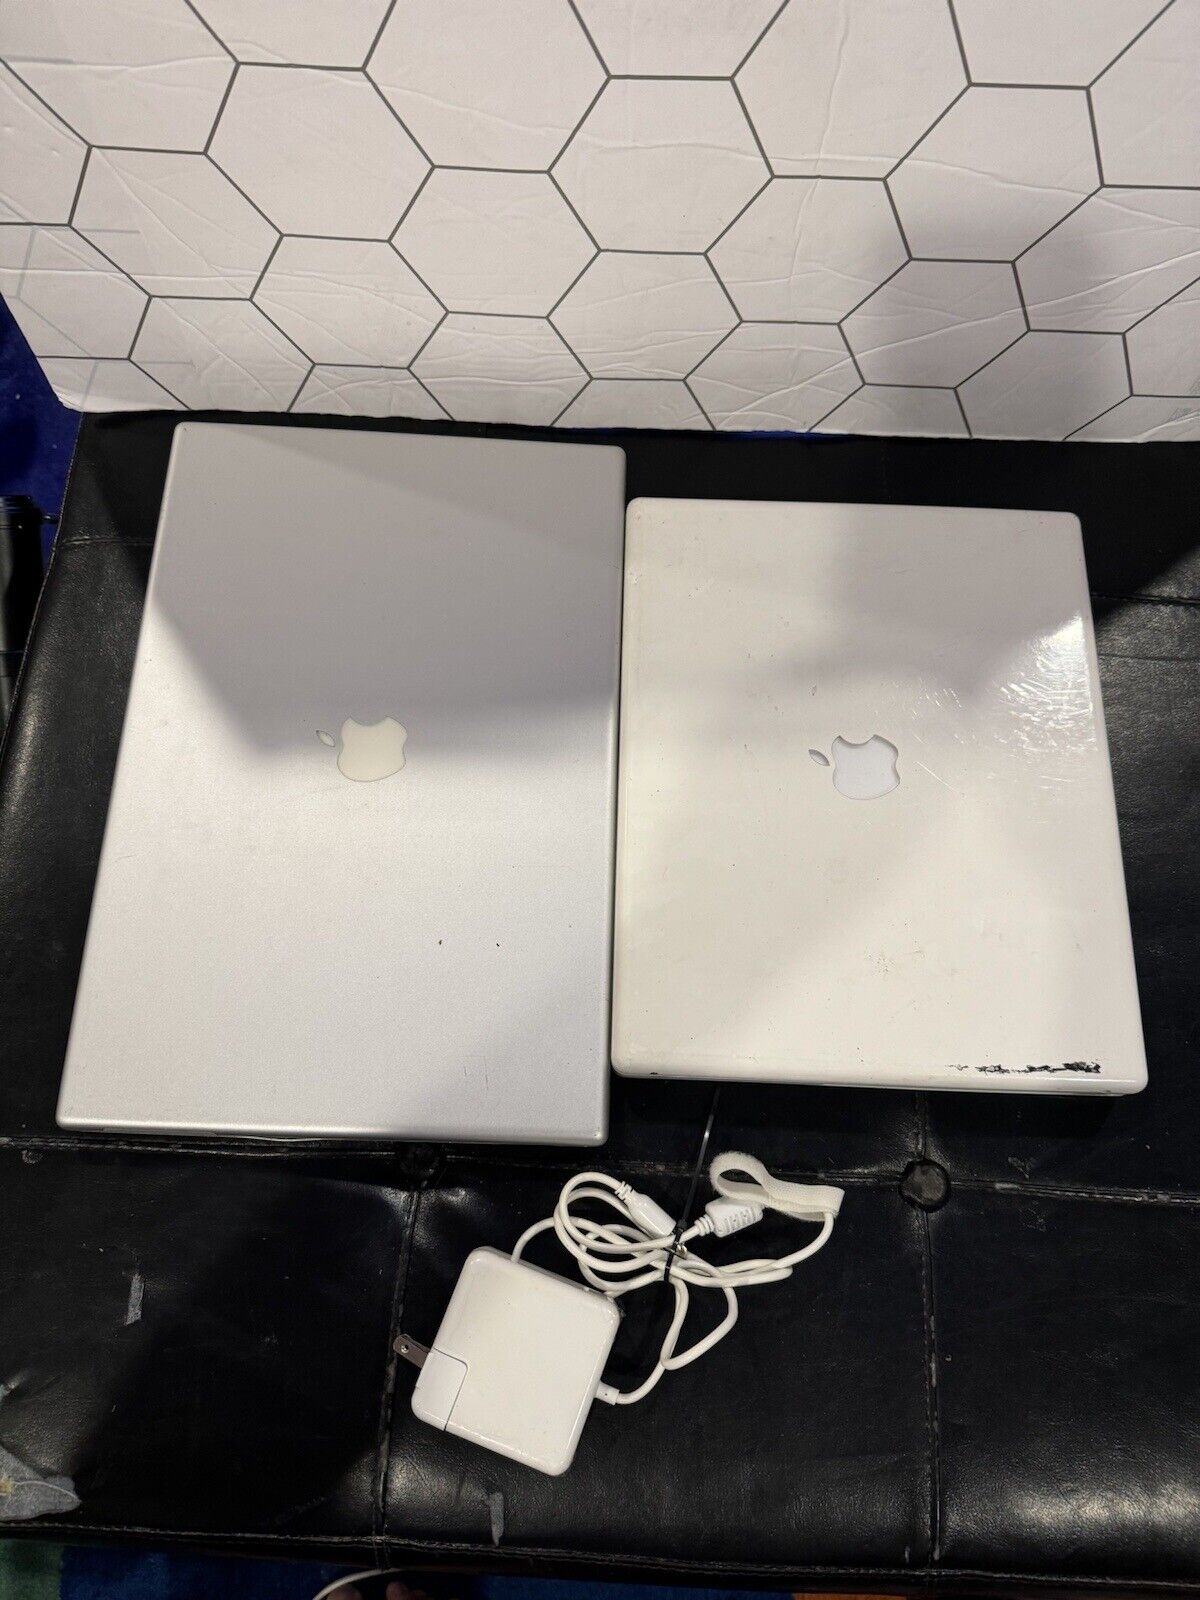 Vintage Apple G3 And G4 Laptops For P/R